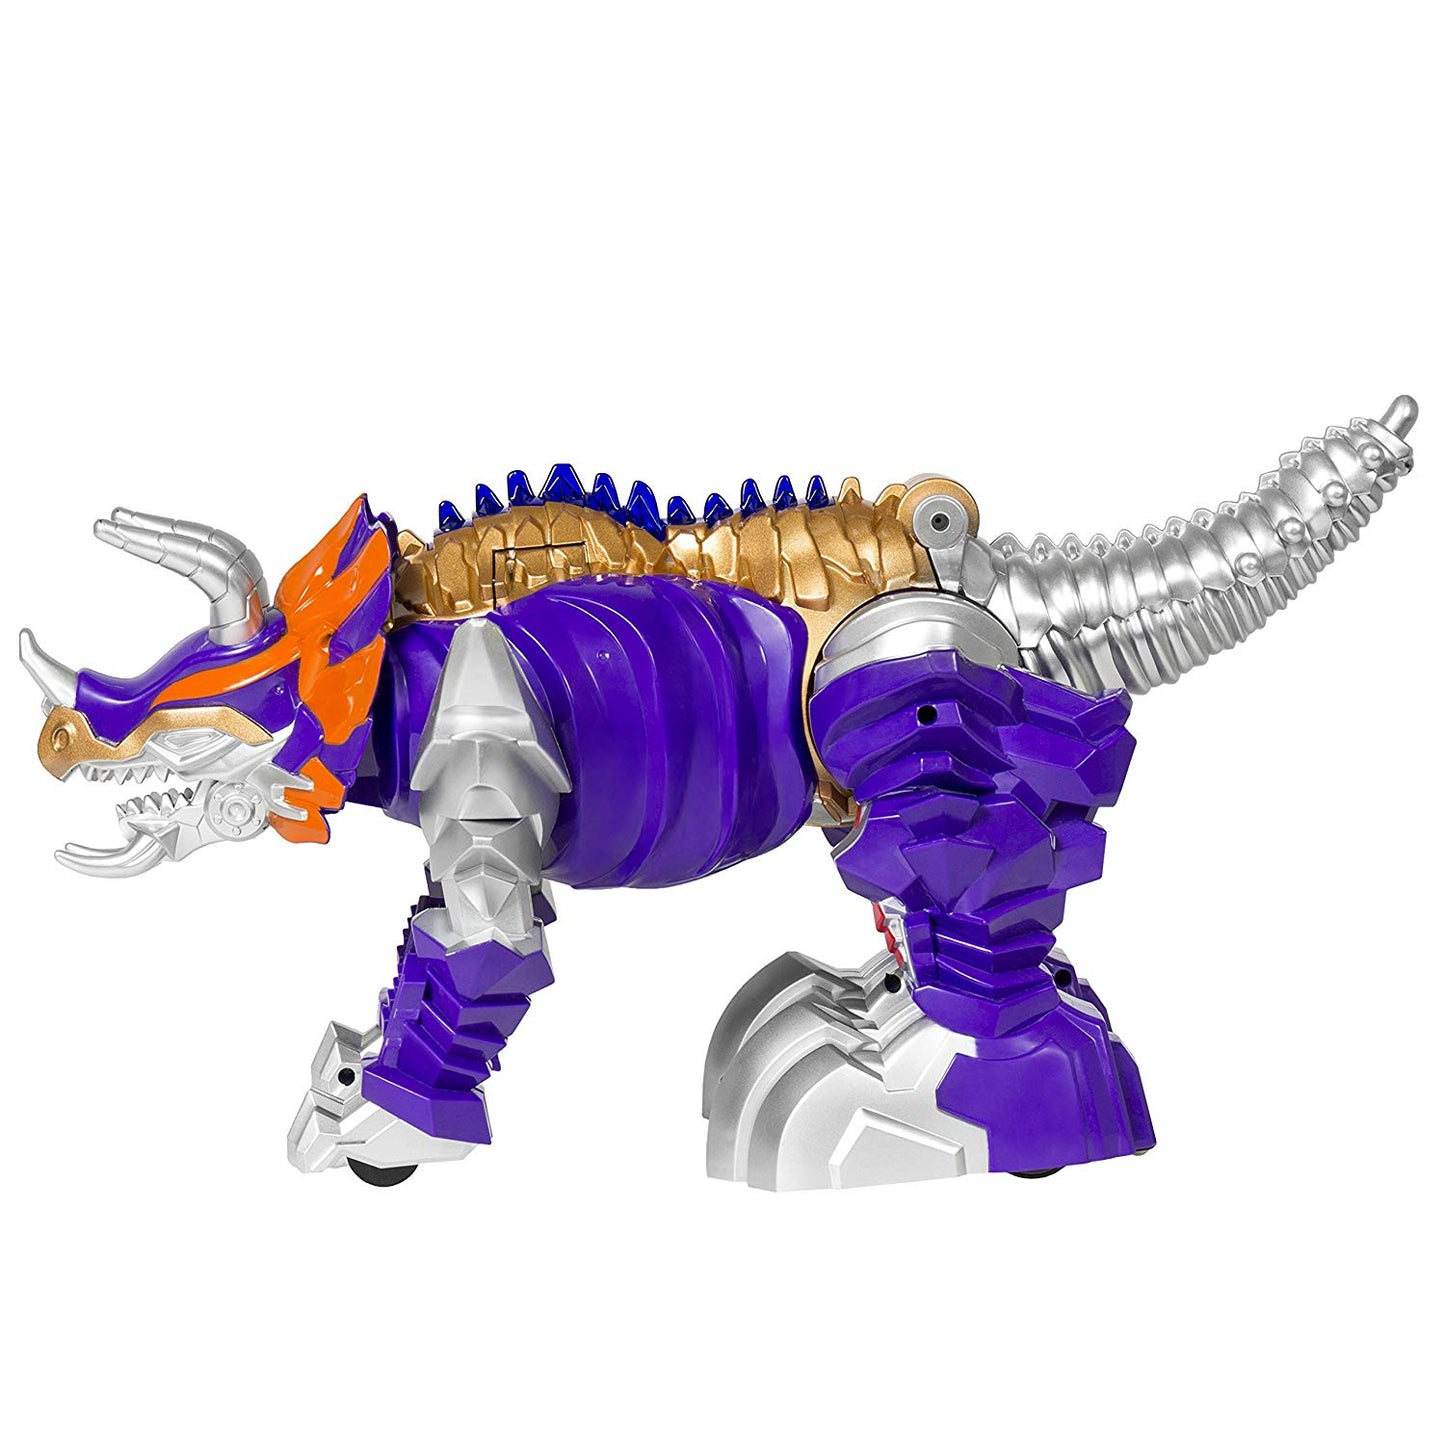 Kids Transformer Remote Control Robot Dinosaur Car w/USB Charger, Lights, and Sounds -Purple/Gold